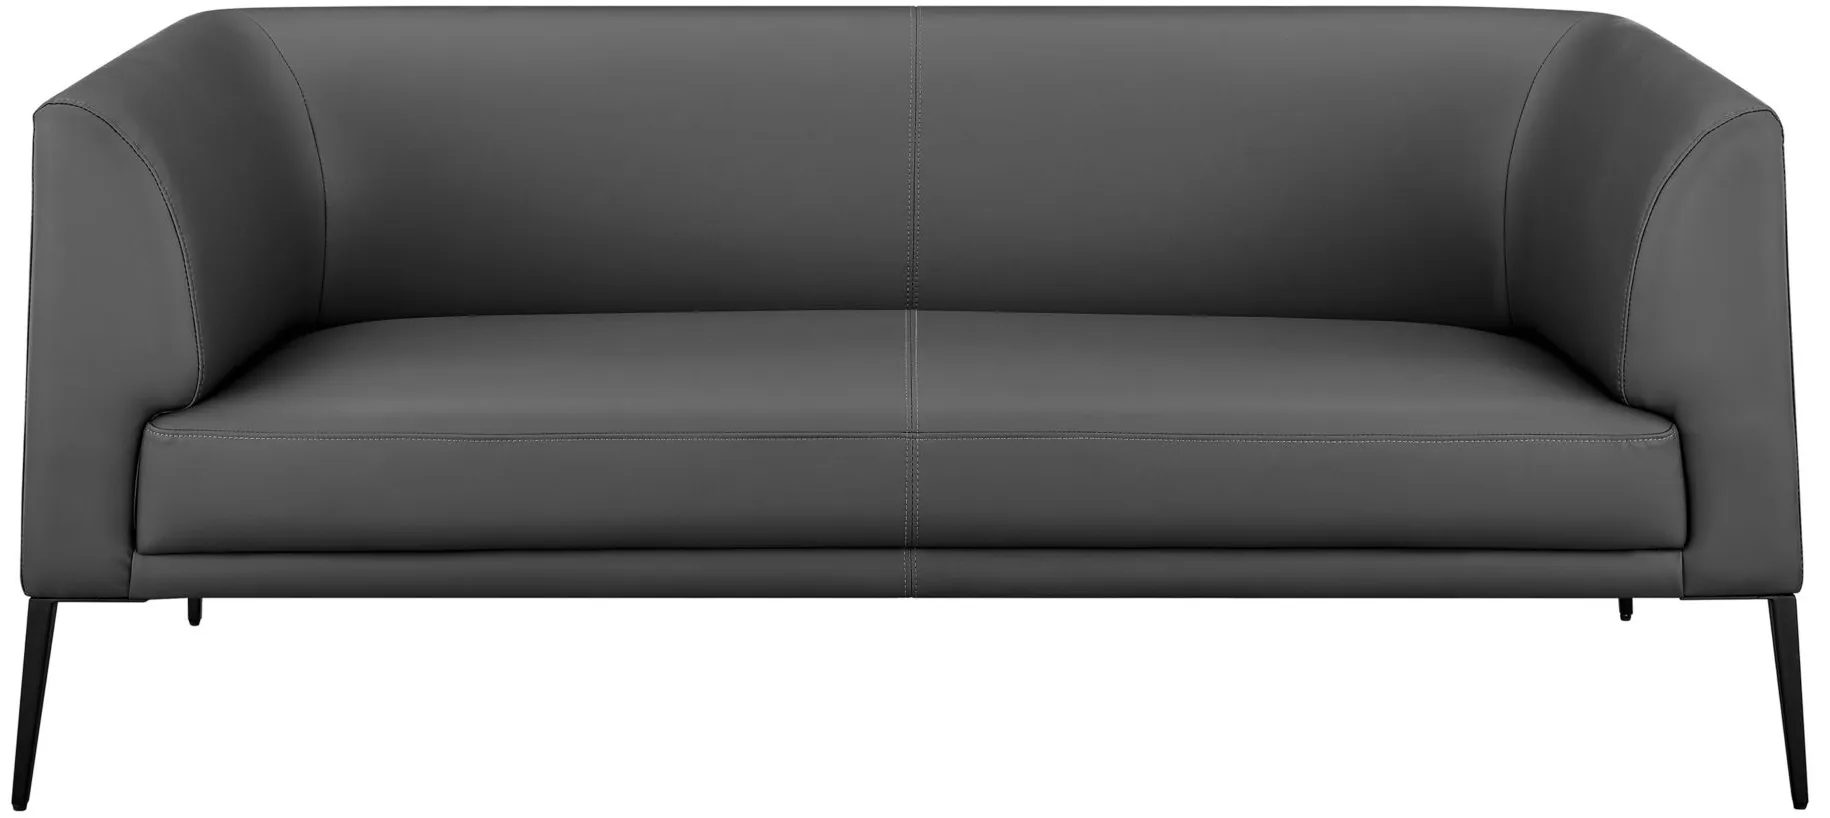 Matias Loveseat in Gray by EuroStyle